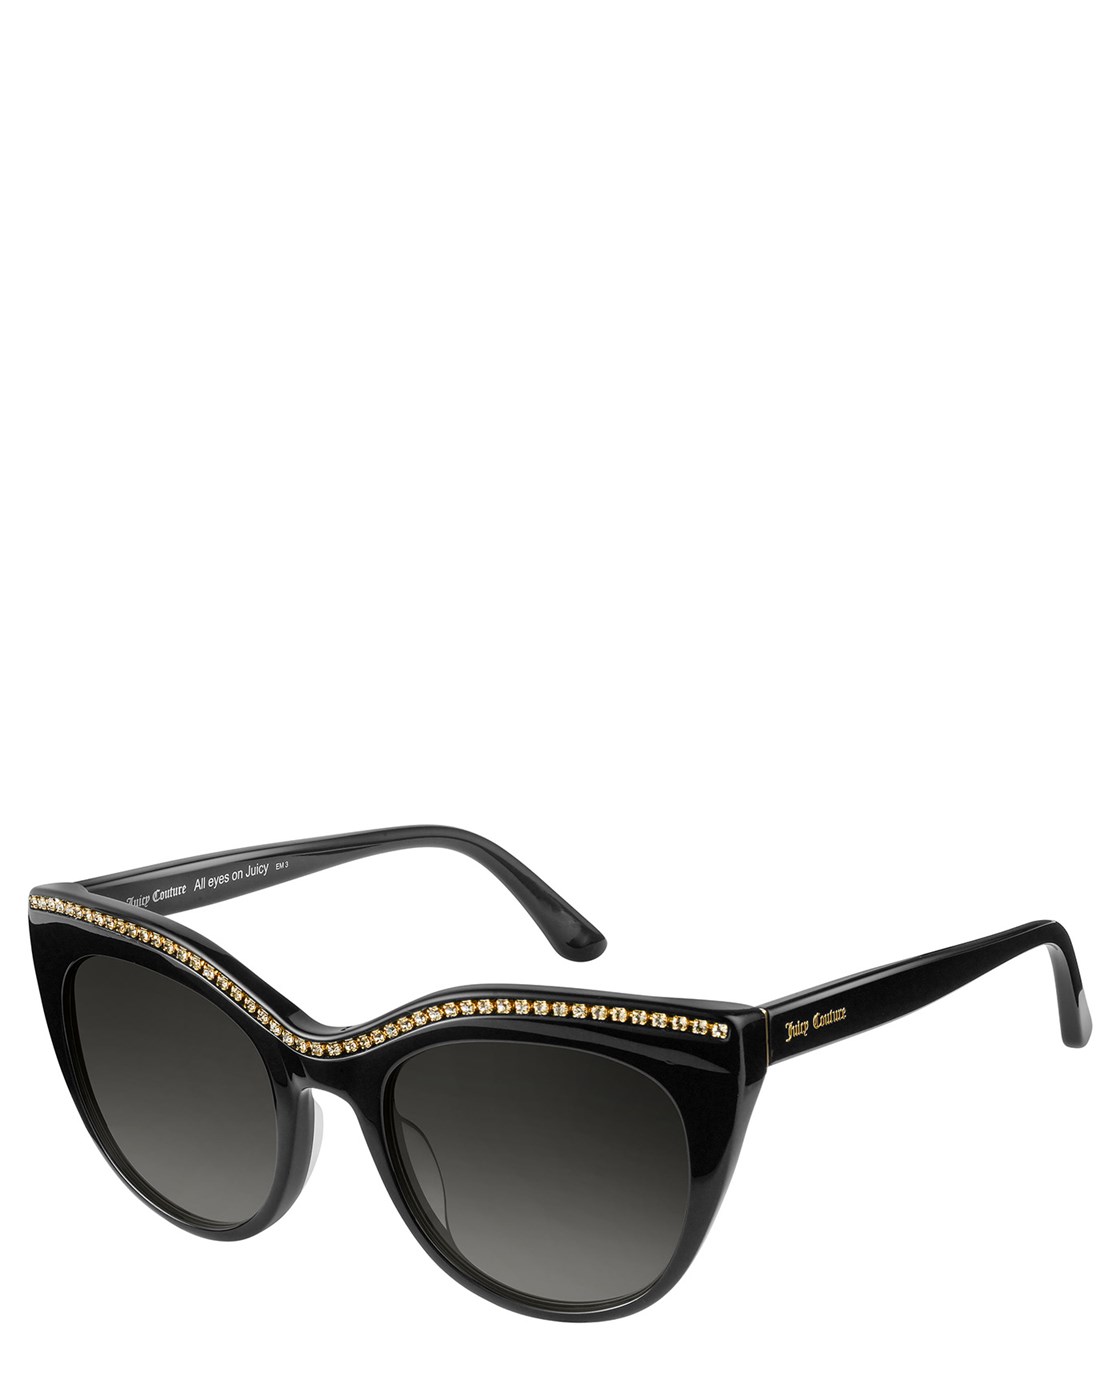 Juicy Couture CRYSTAL DETAIL SUNGLASSES